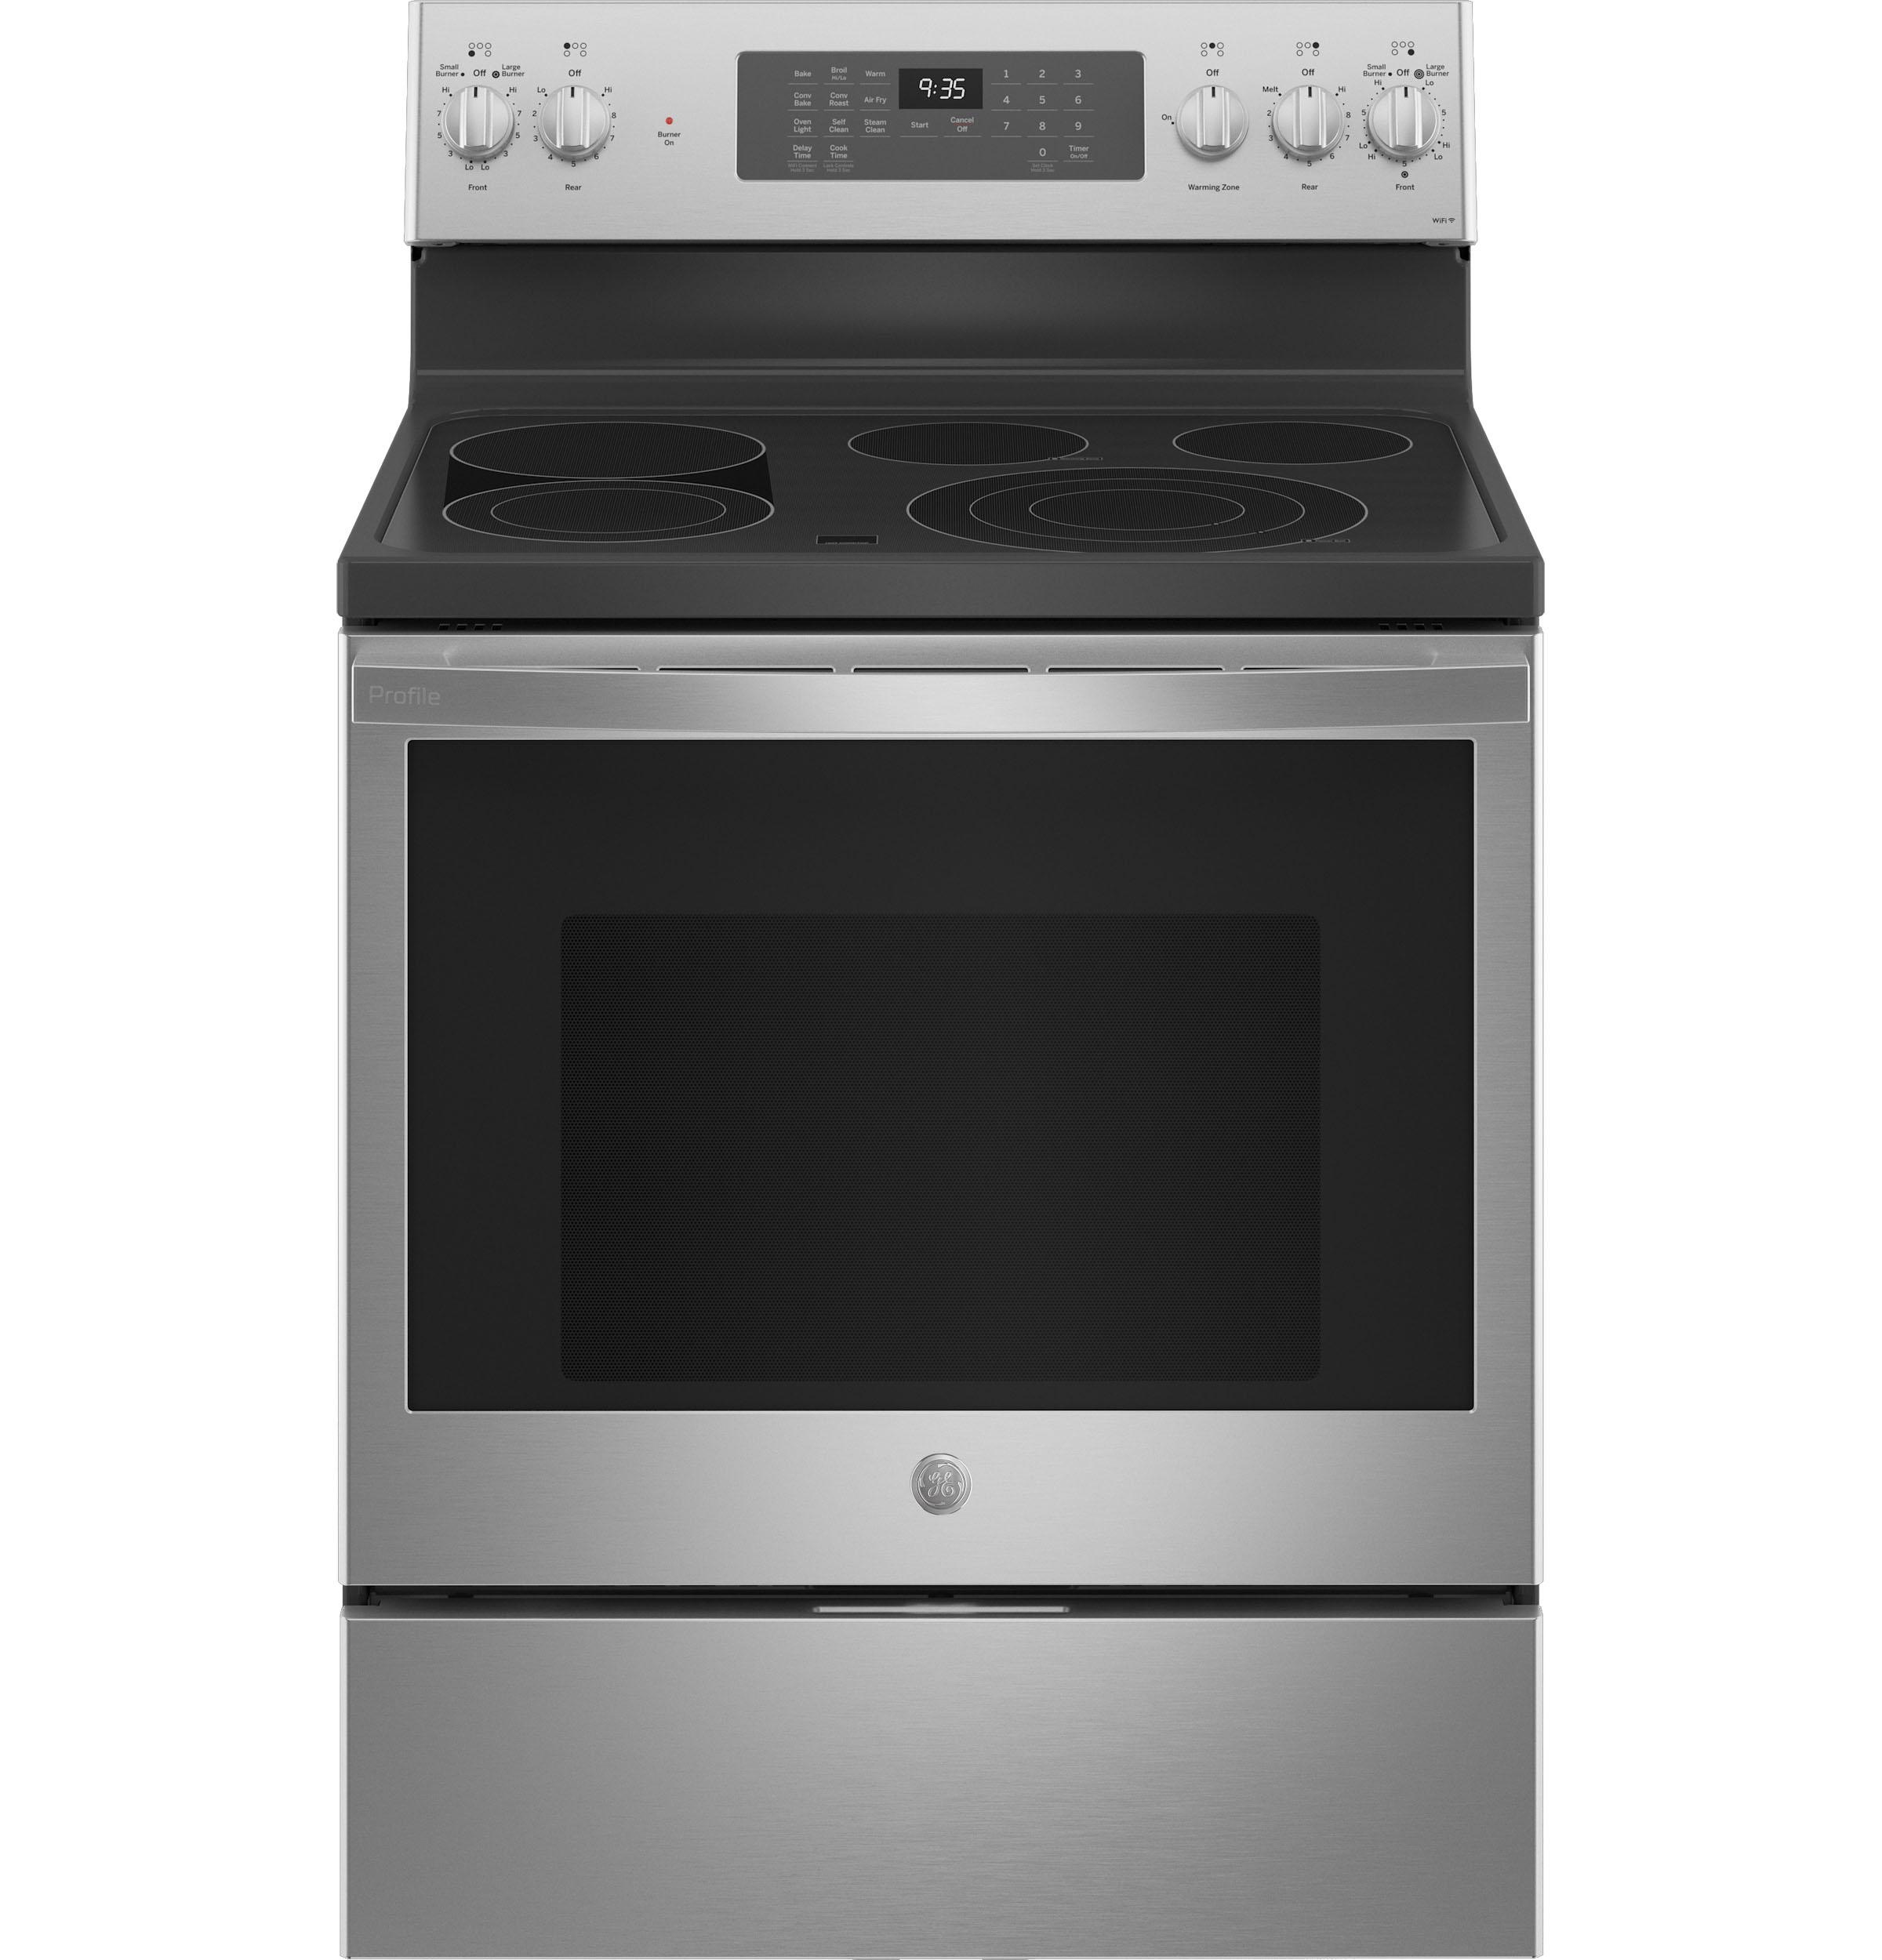 GE Profile™ 30" Smart Free-Standing Electric Convection Fingerprint Resistant Range with Air Fry - image 1 of 5